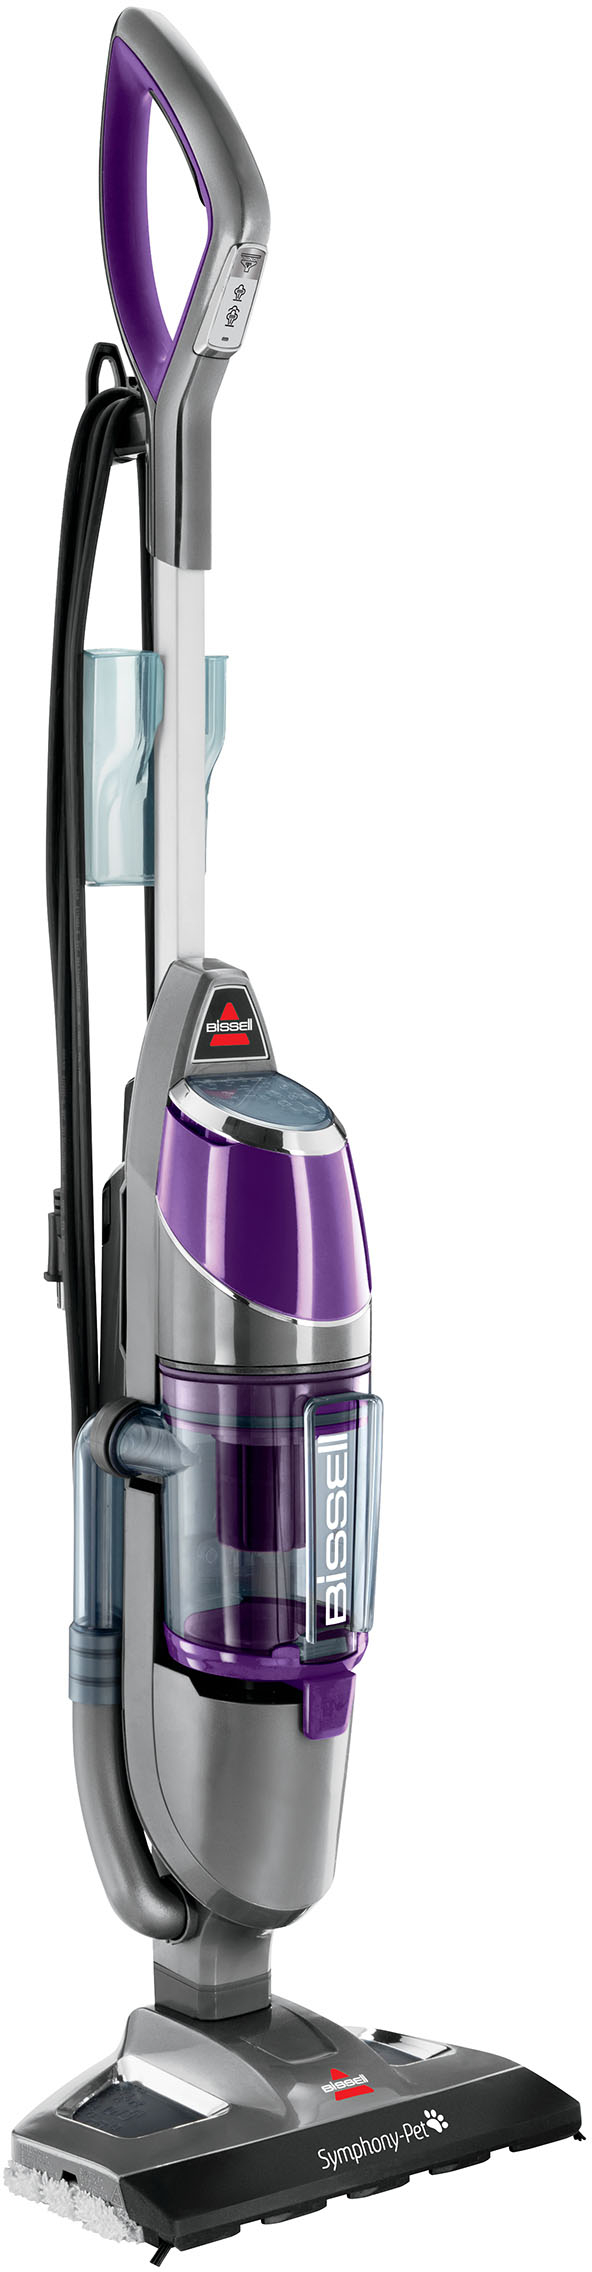 Angle View: BISSELL - Symphony Pet All-in-One Vacuum and Steam Mop - Grey and Purple